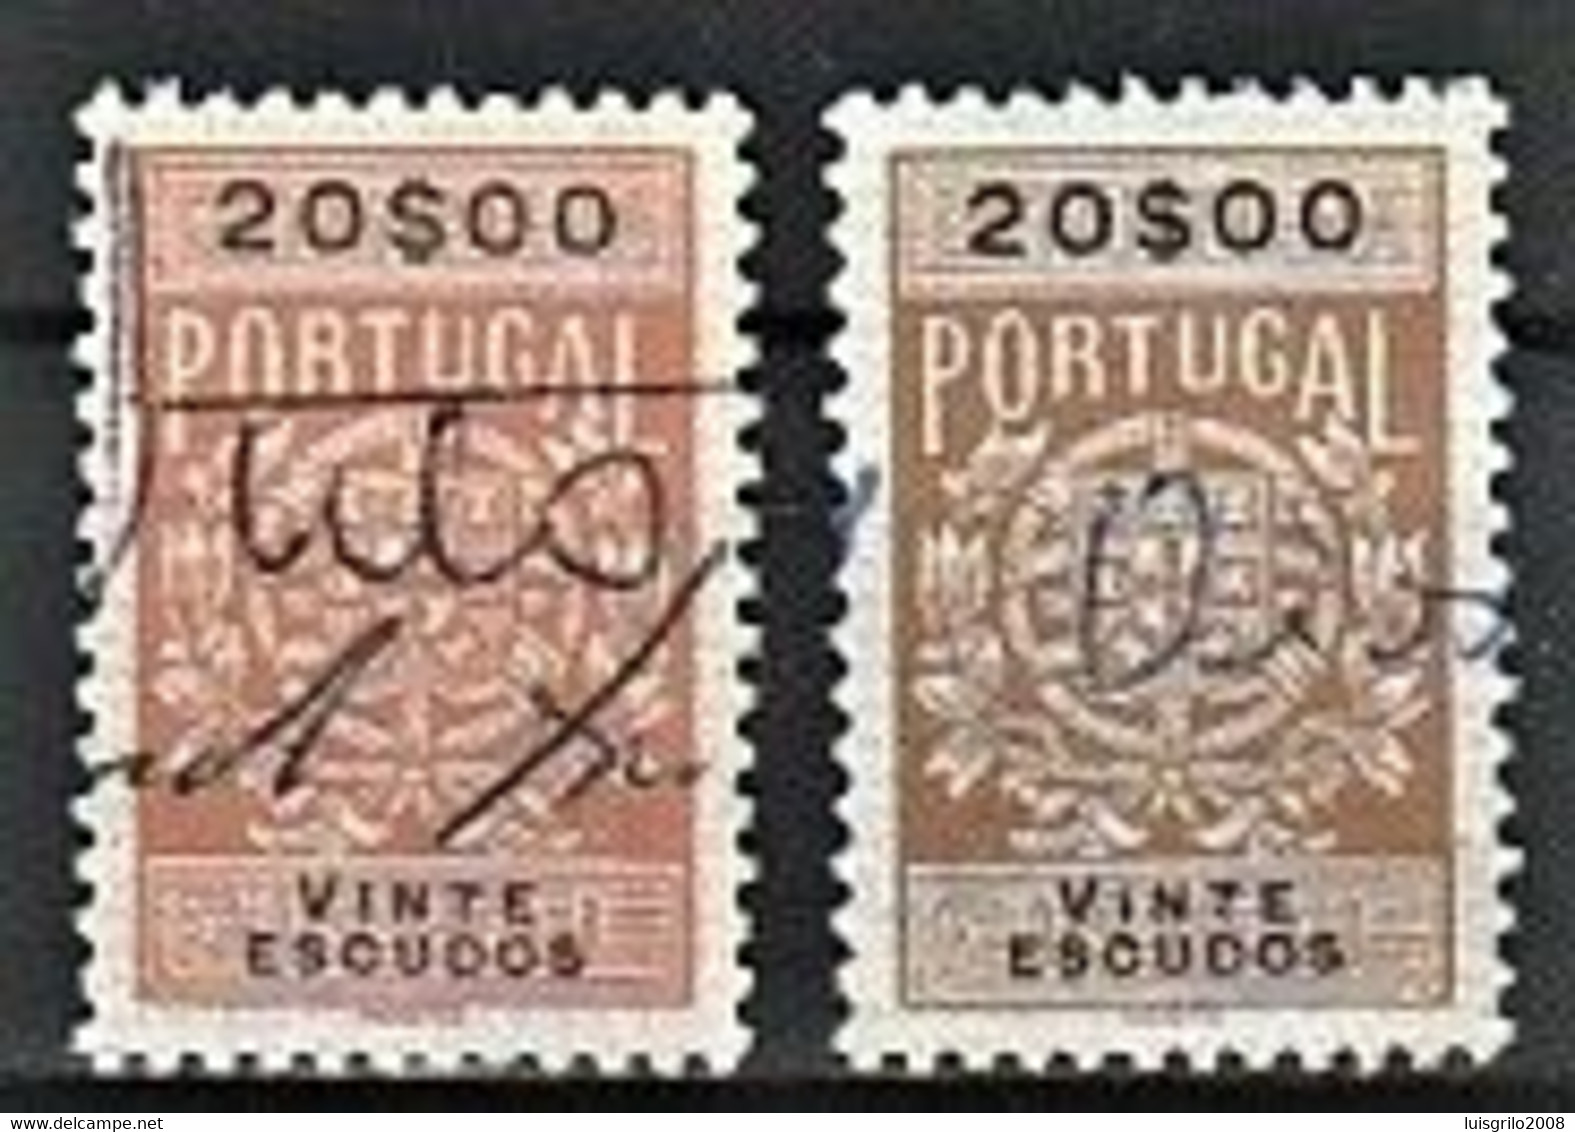 Fiscal/ Revenue, Portugal 1940 - Estampilha Fiscal -|- 20$00 - COLOR VARIANT - Is The Stamp Of The Right - Usado